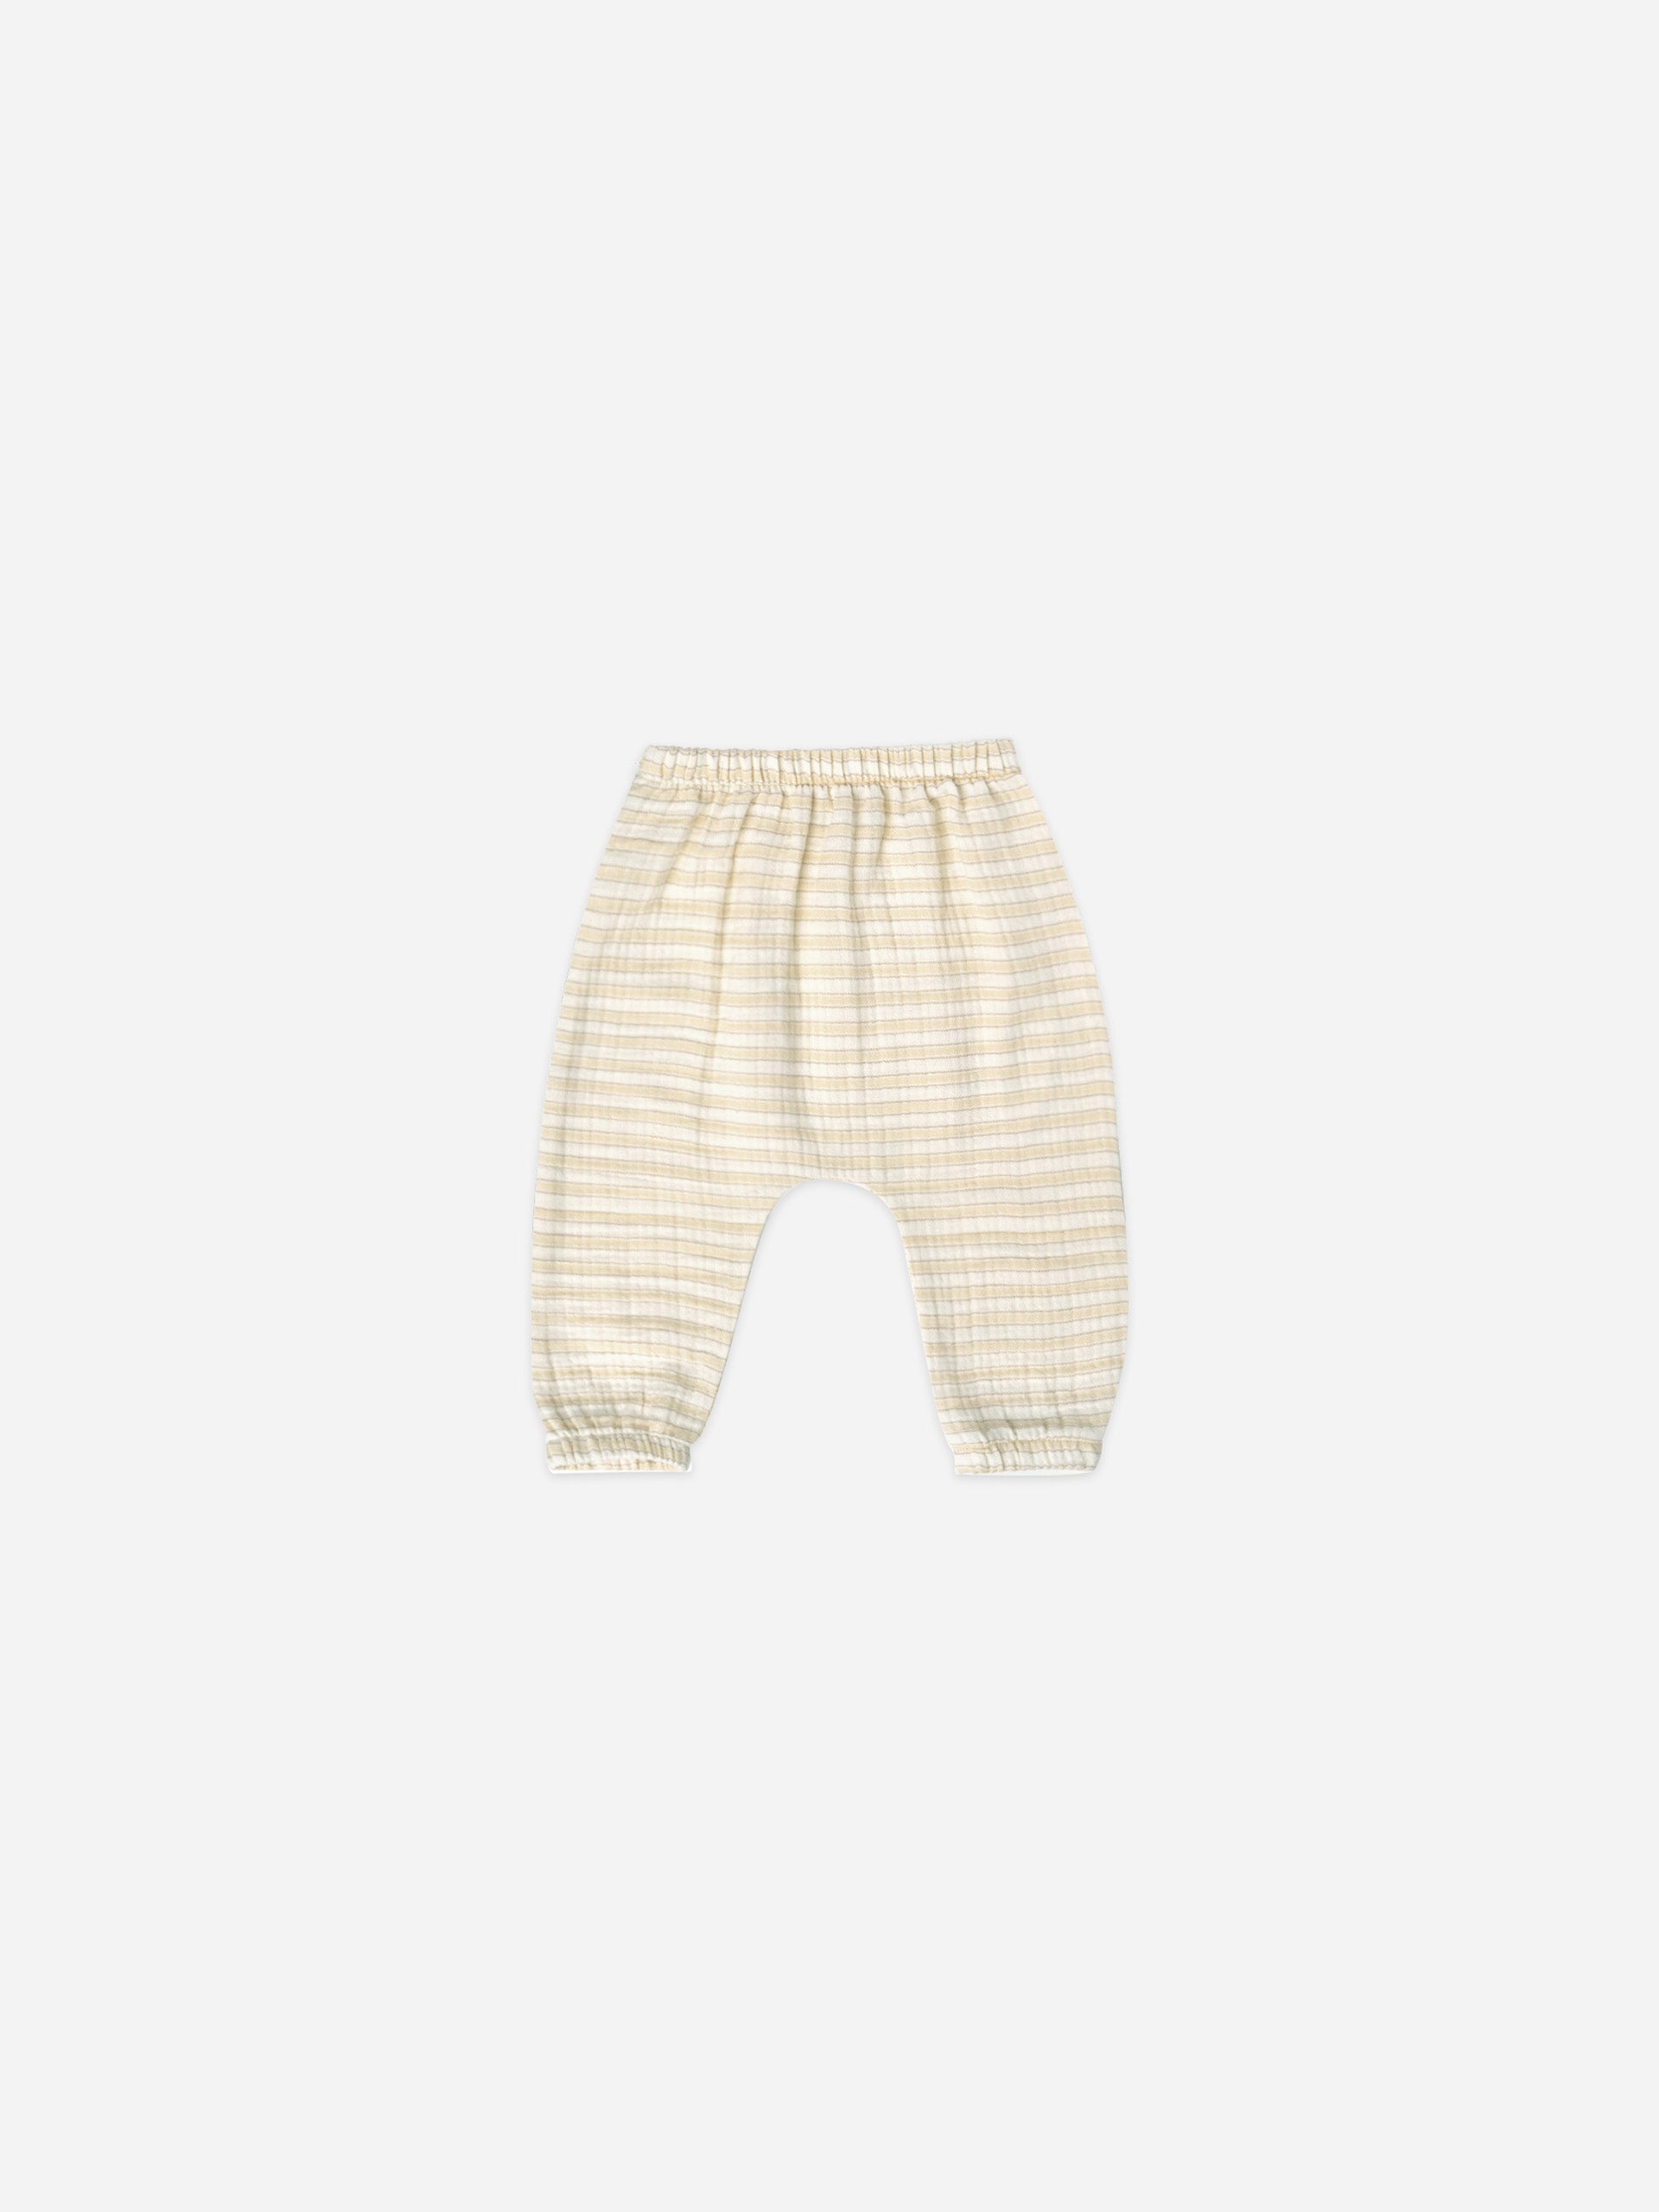 woven pant | vintage stripe - Quincy Mae | Baby Basics | Baby Clothing | Organic Baby Clothes | Modern Baby Boy Clothes |